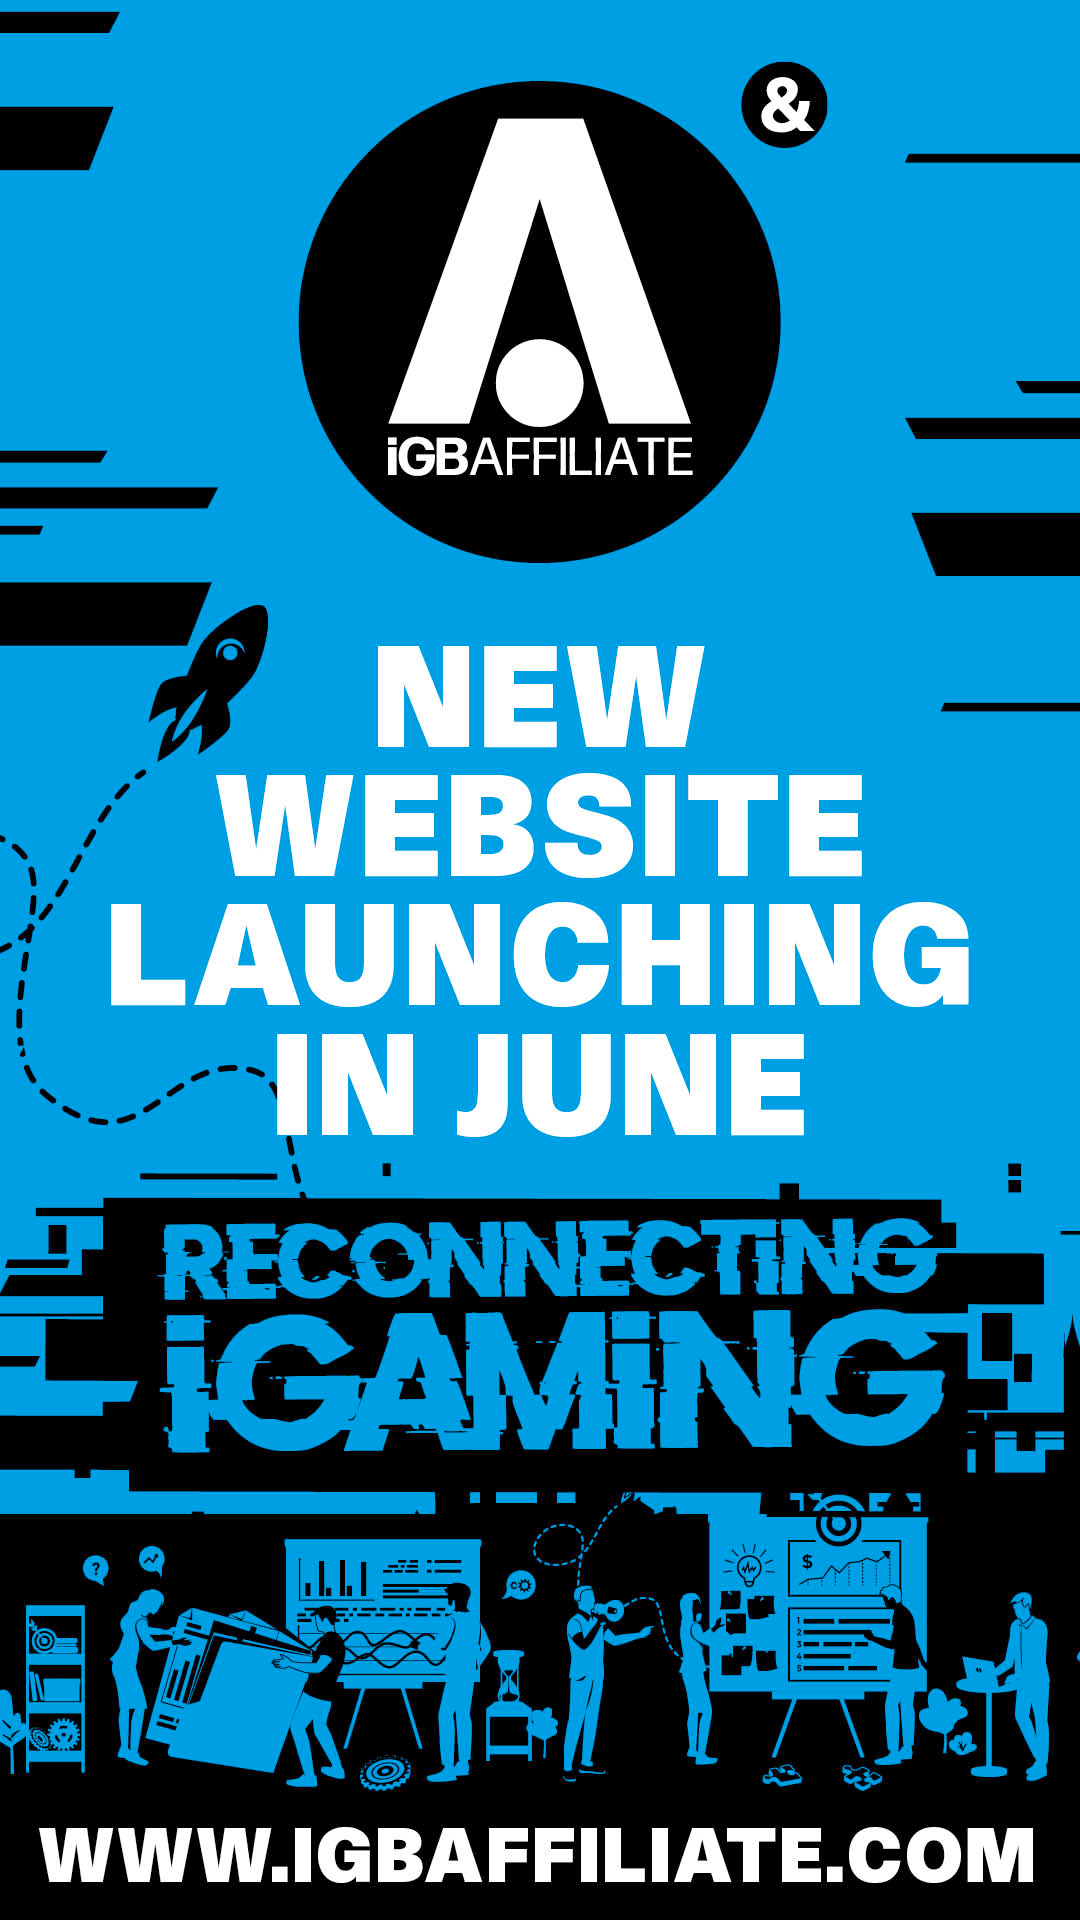 reconnecting igaming